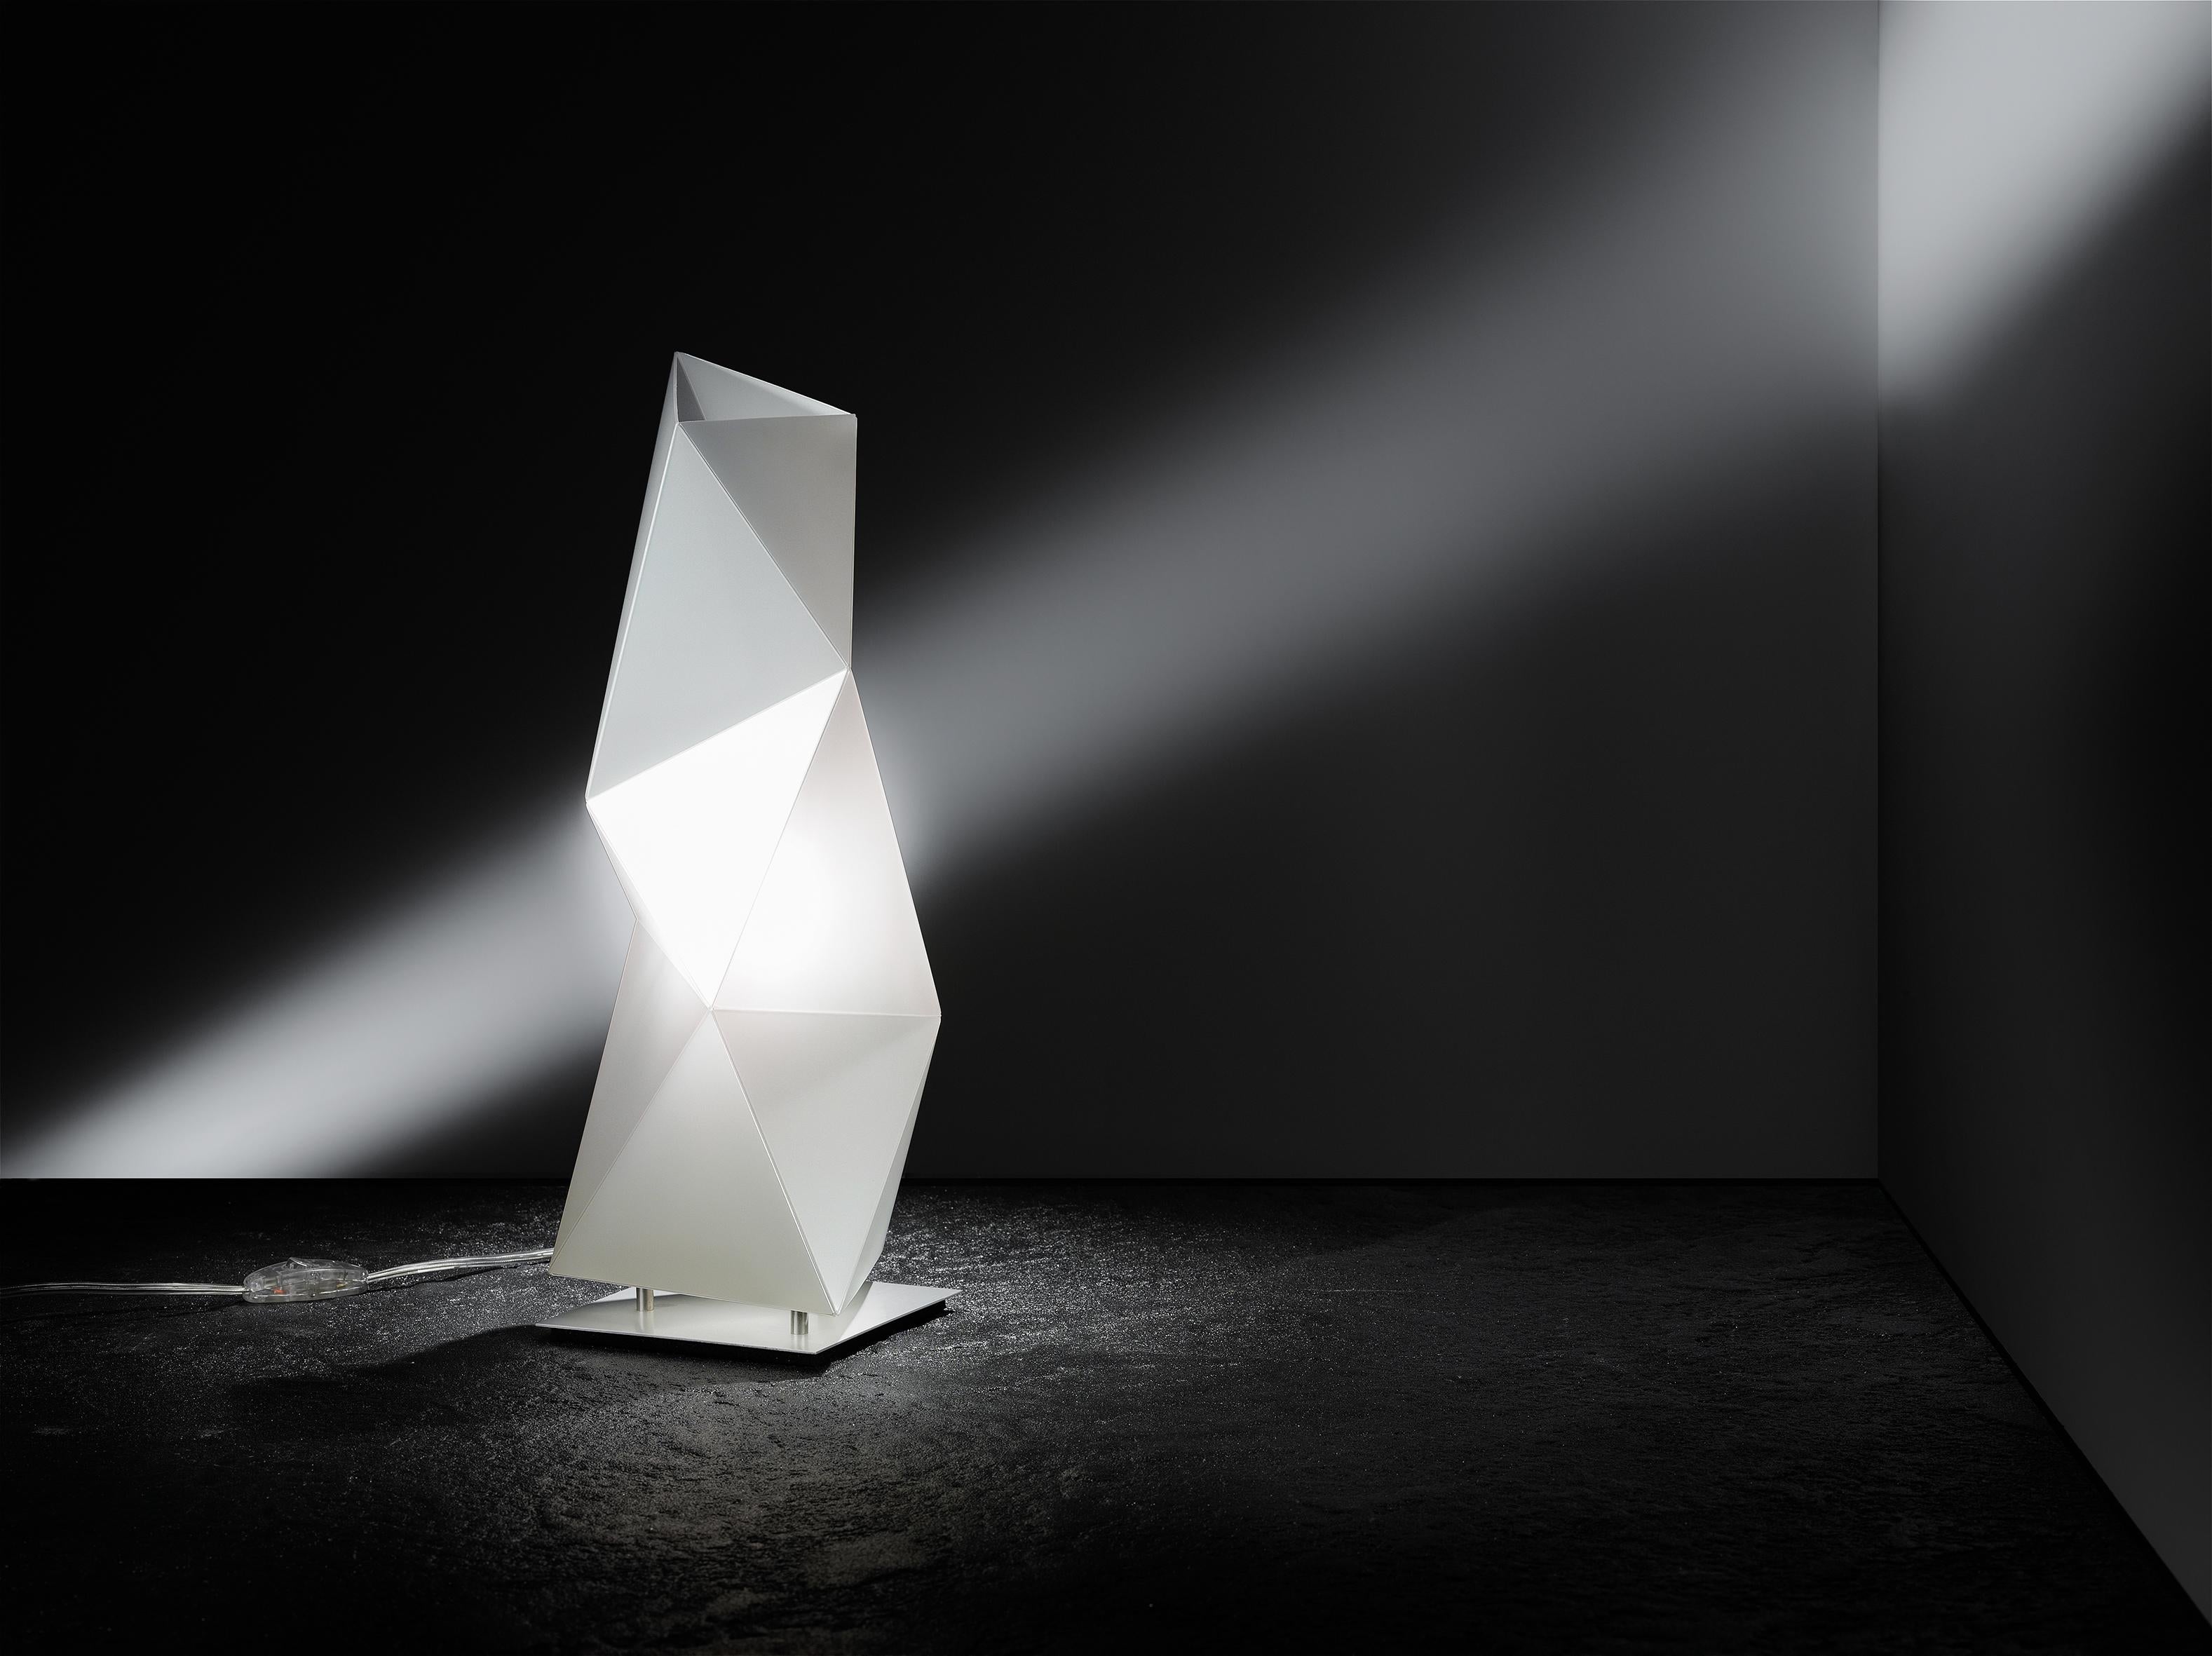 Sculptural, dynamic, and modern, inspired by the iconic works of Brancusi. Diamond’s geometric design allows the light to accentuate its various facets and angles. The luminous sculpture is available in three dimensions, each fit for different